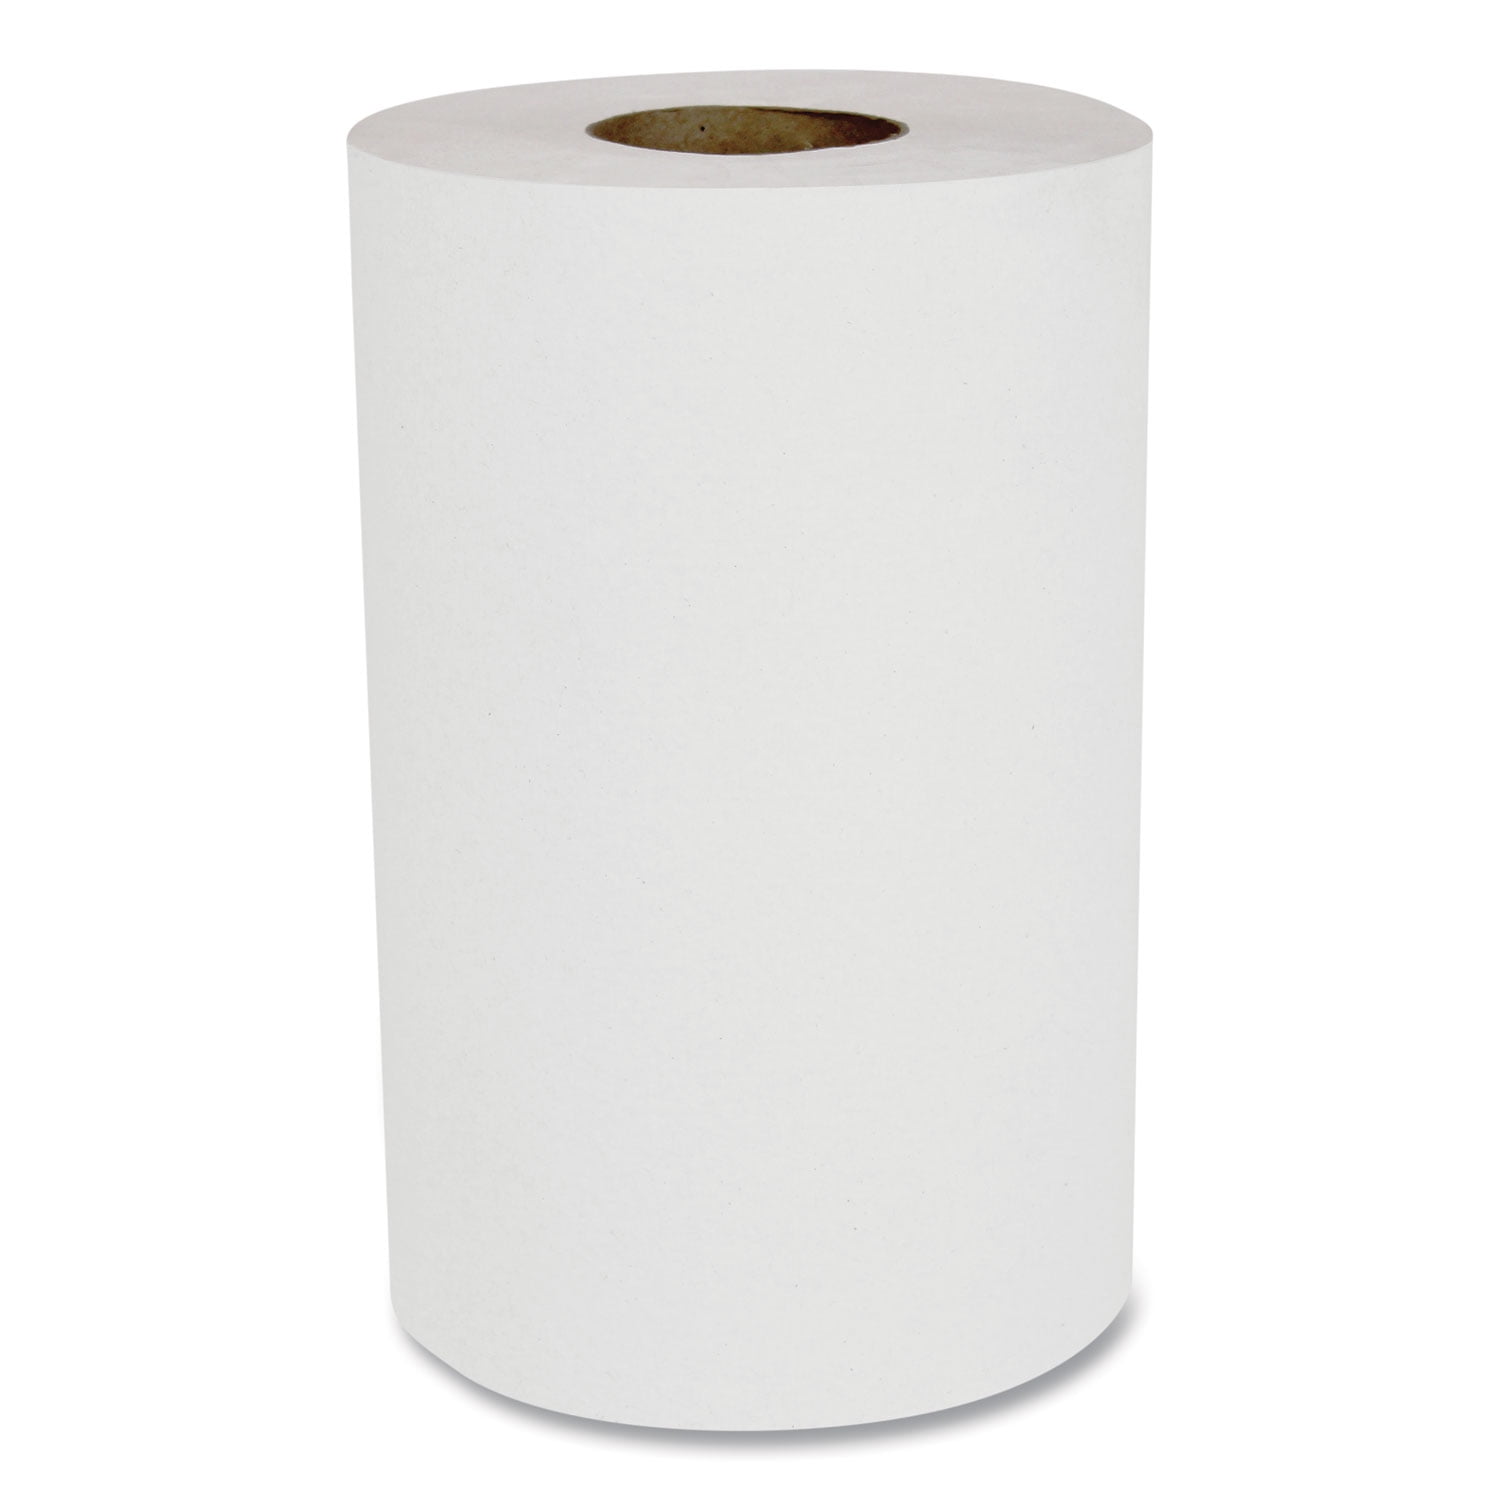 Morcon Paper W6800 7 9/10 inch X 800 ft White for sale online 6 Rolls Hardwound Roll Towels 